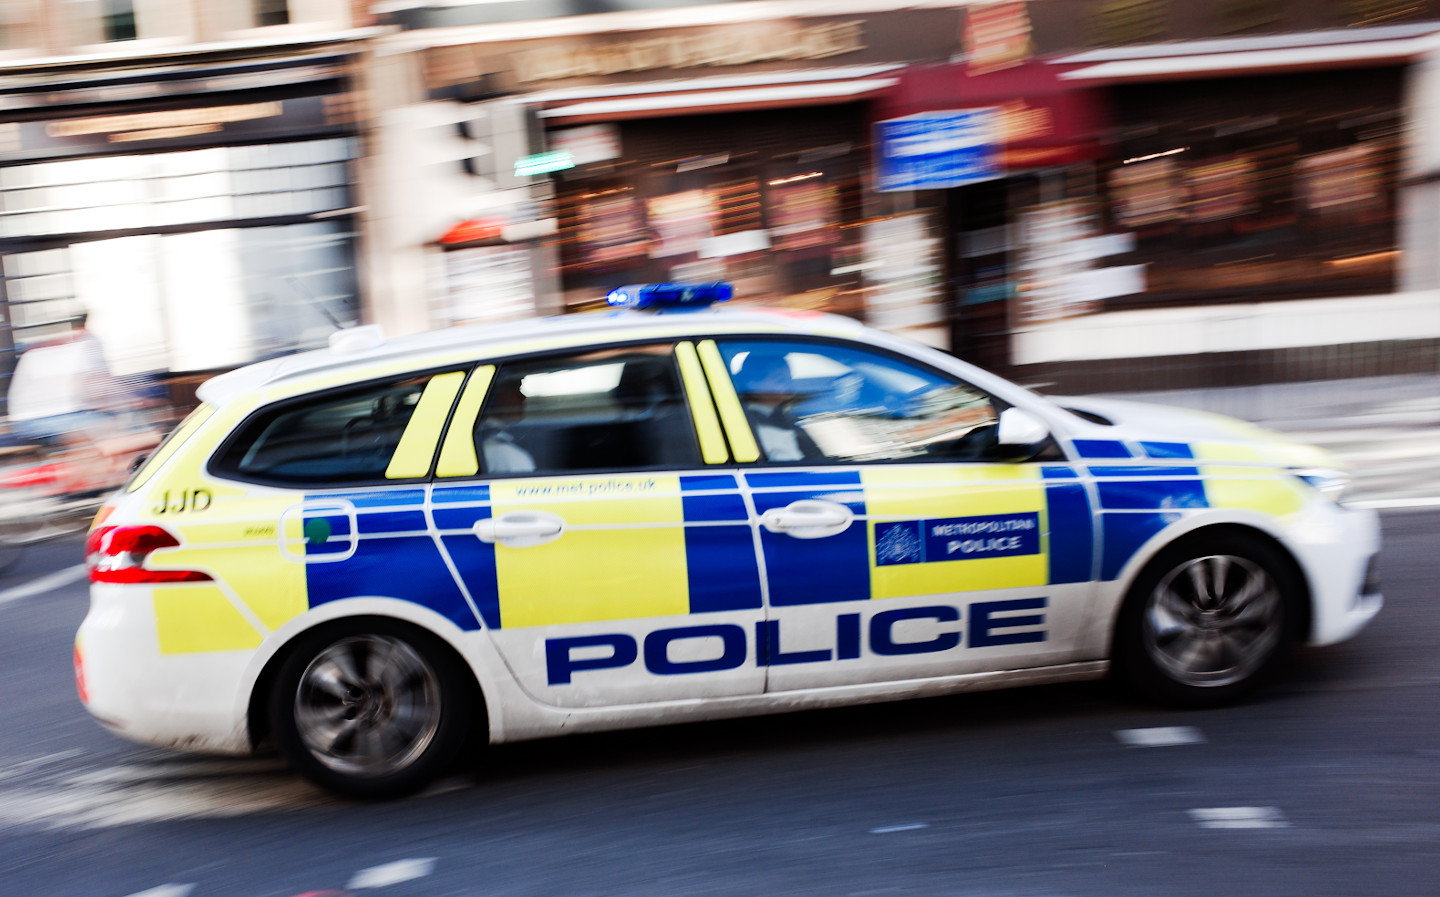 More road police to be deployed across UK